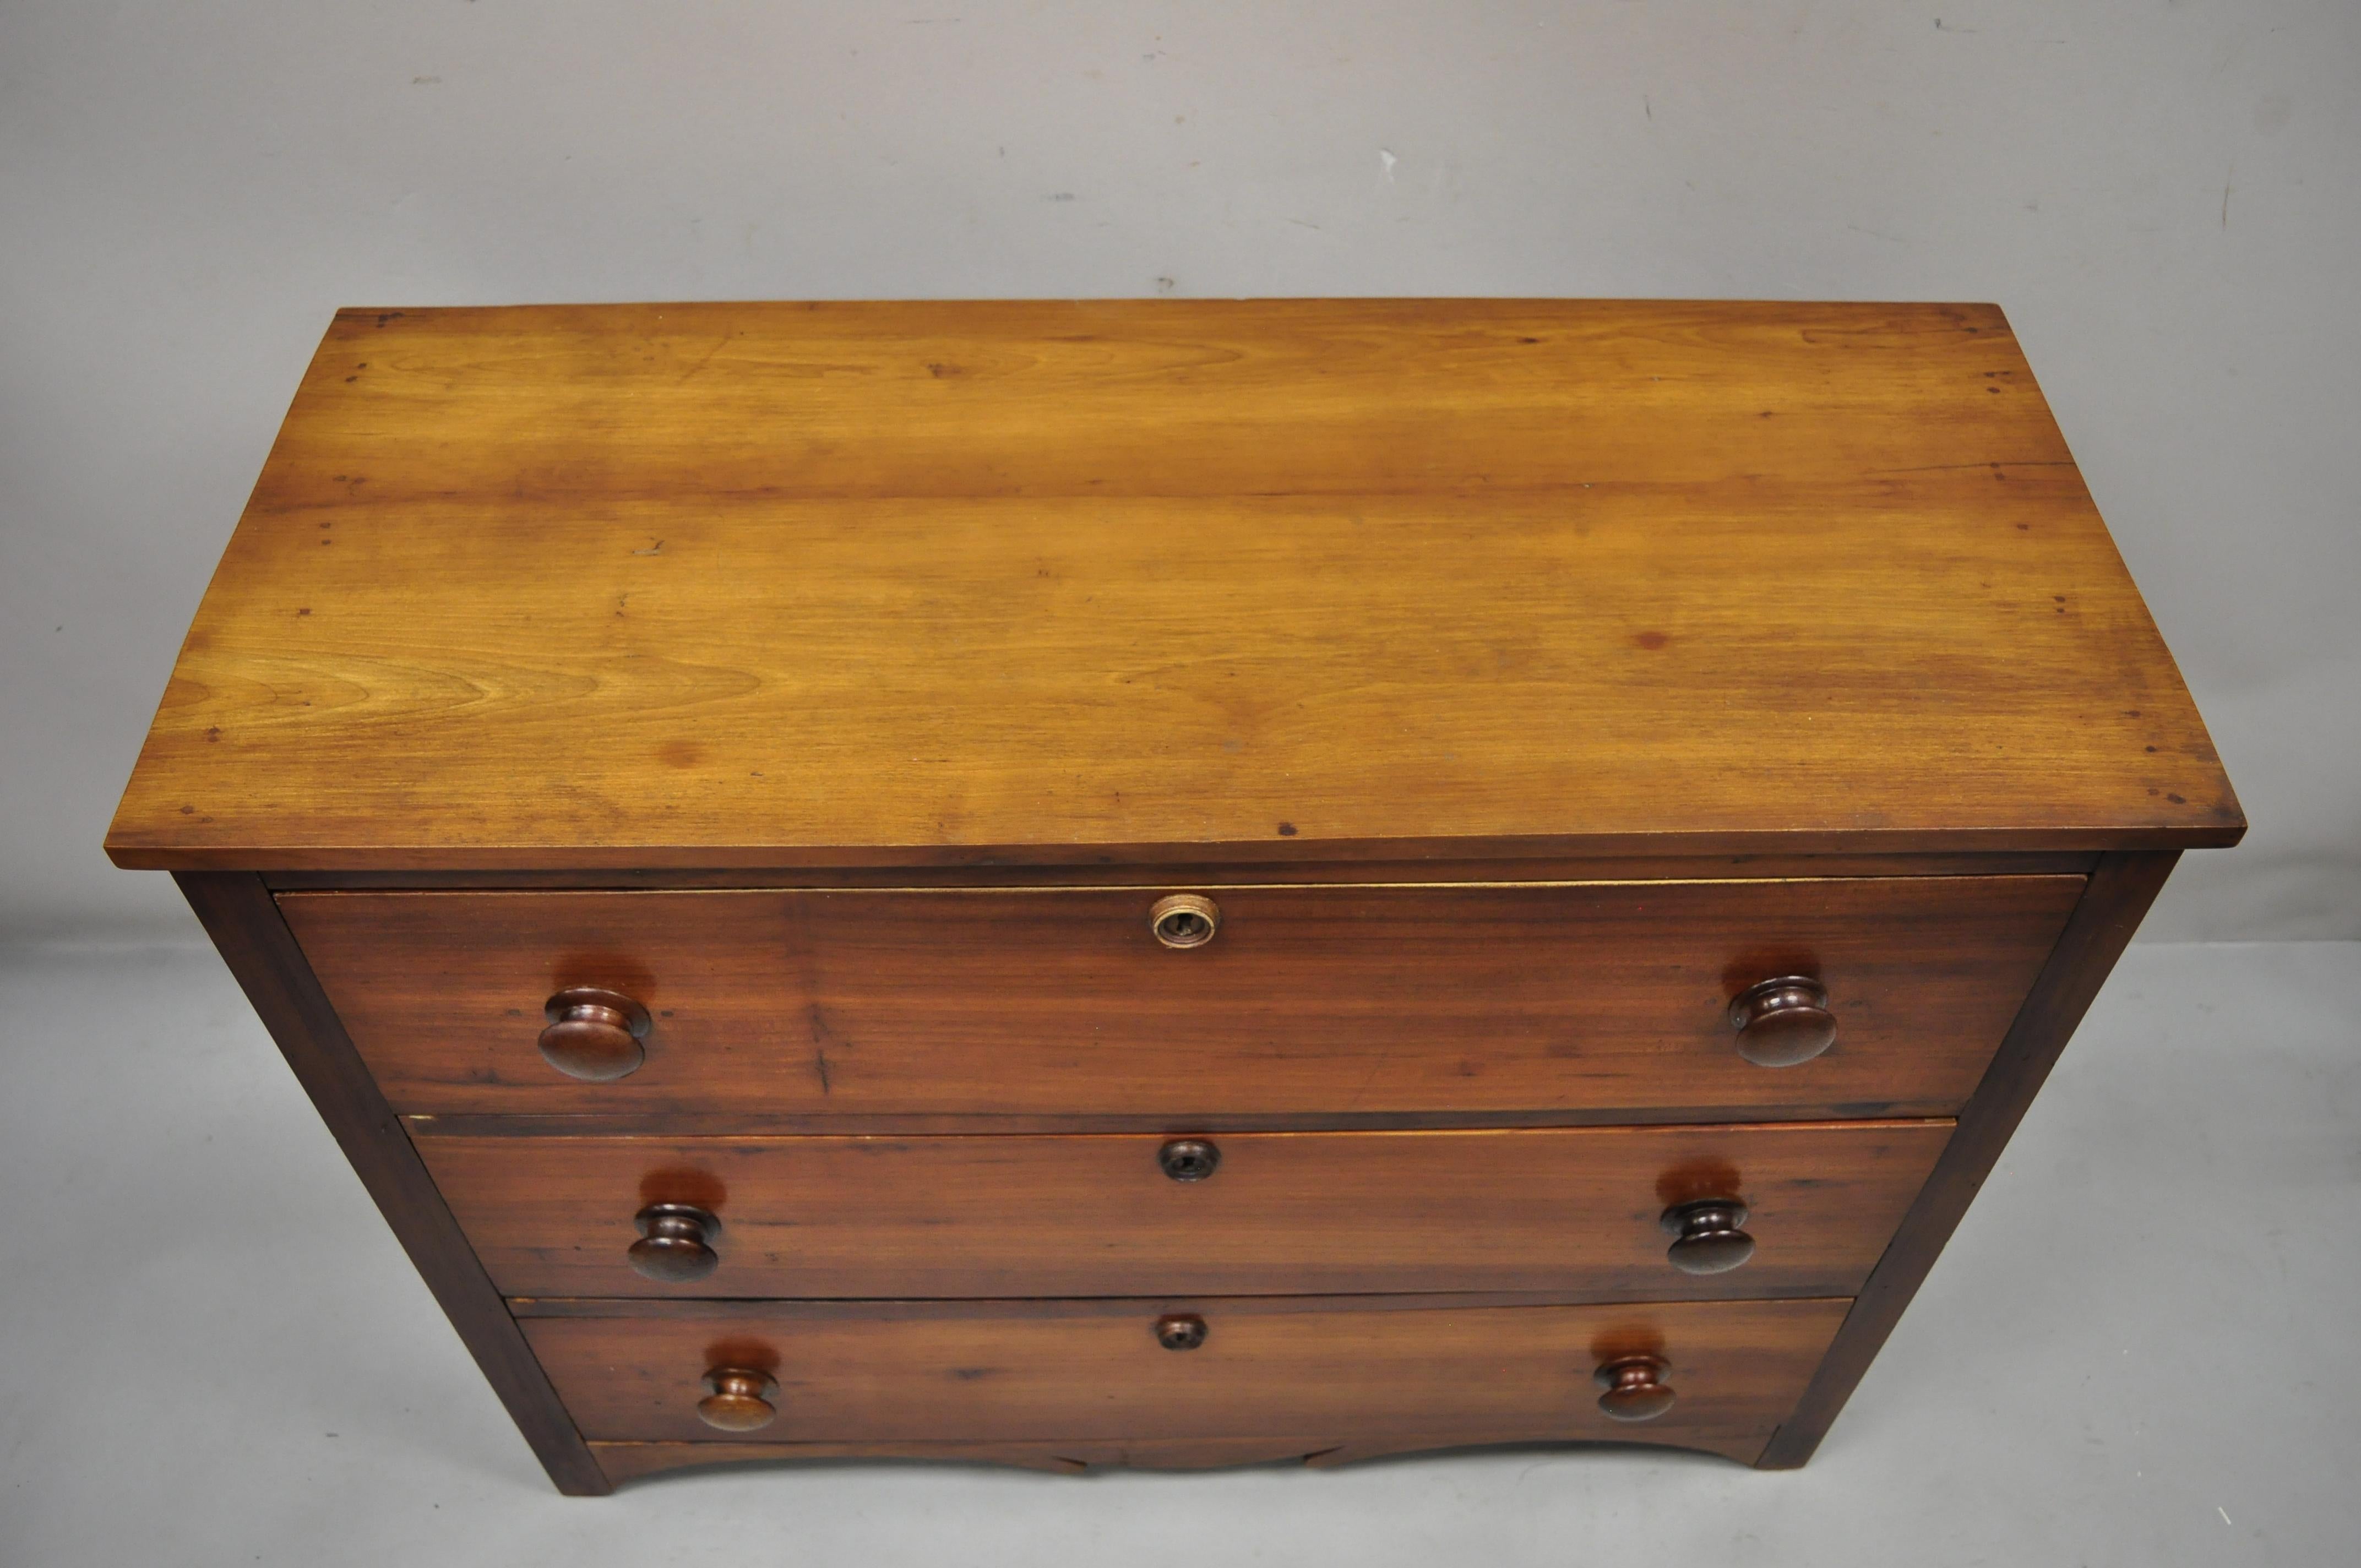 North American Antique 19th Century Cherry Wood Three Drawer Colonial Primitive Dresser Chest